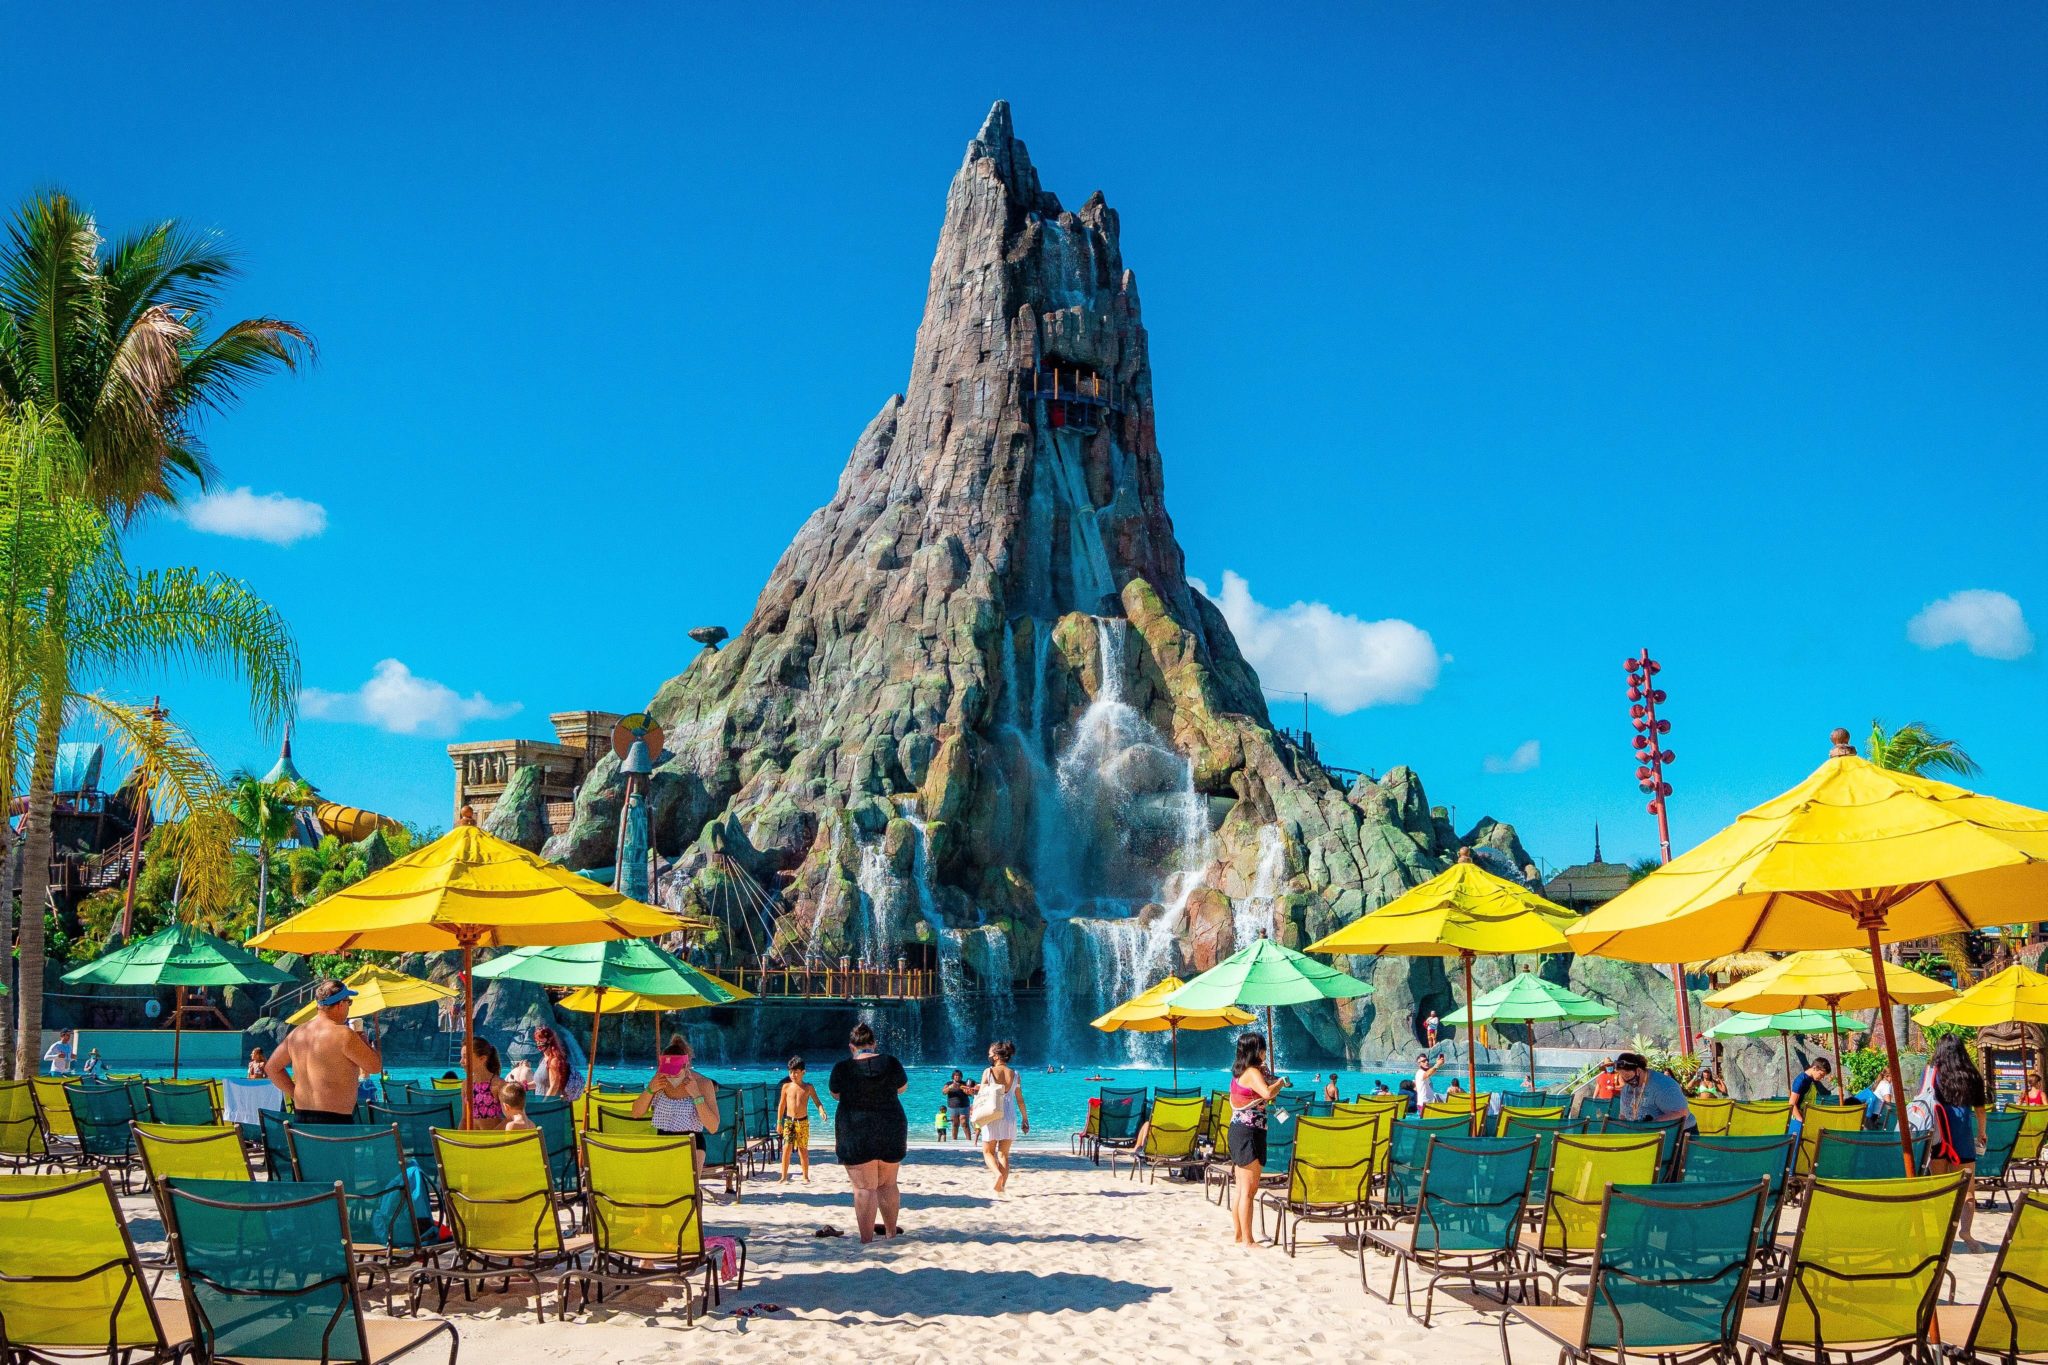 Our first day back to Universal’s Volcano Bay Orlando Homes Blog